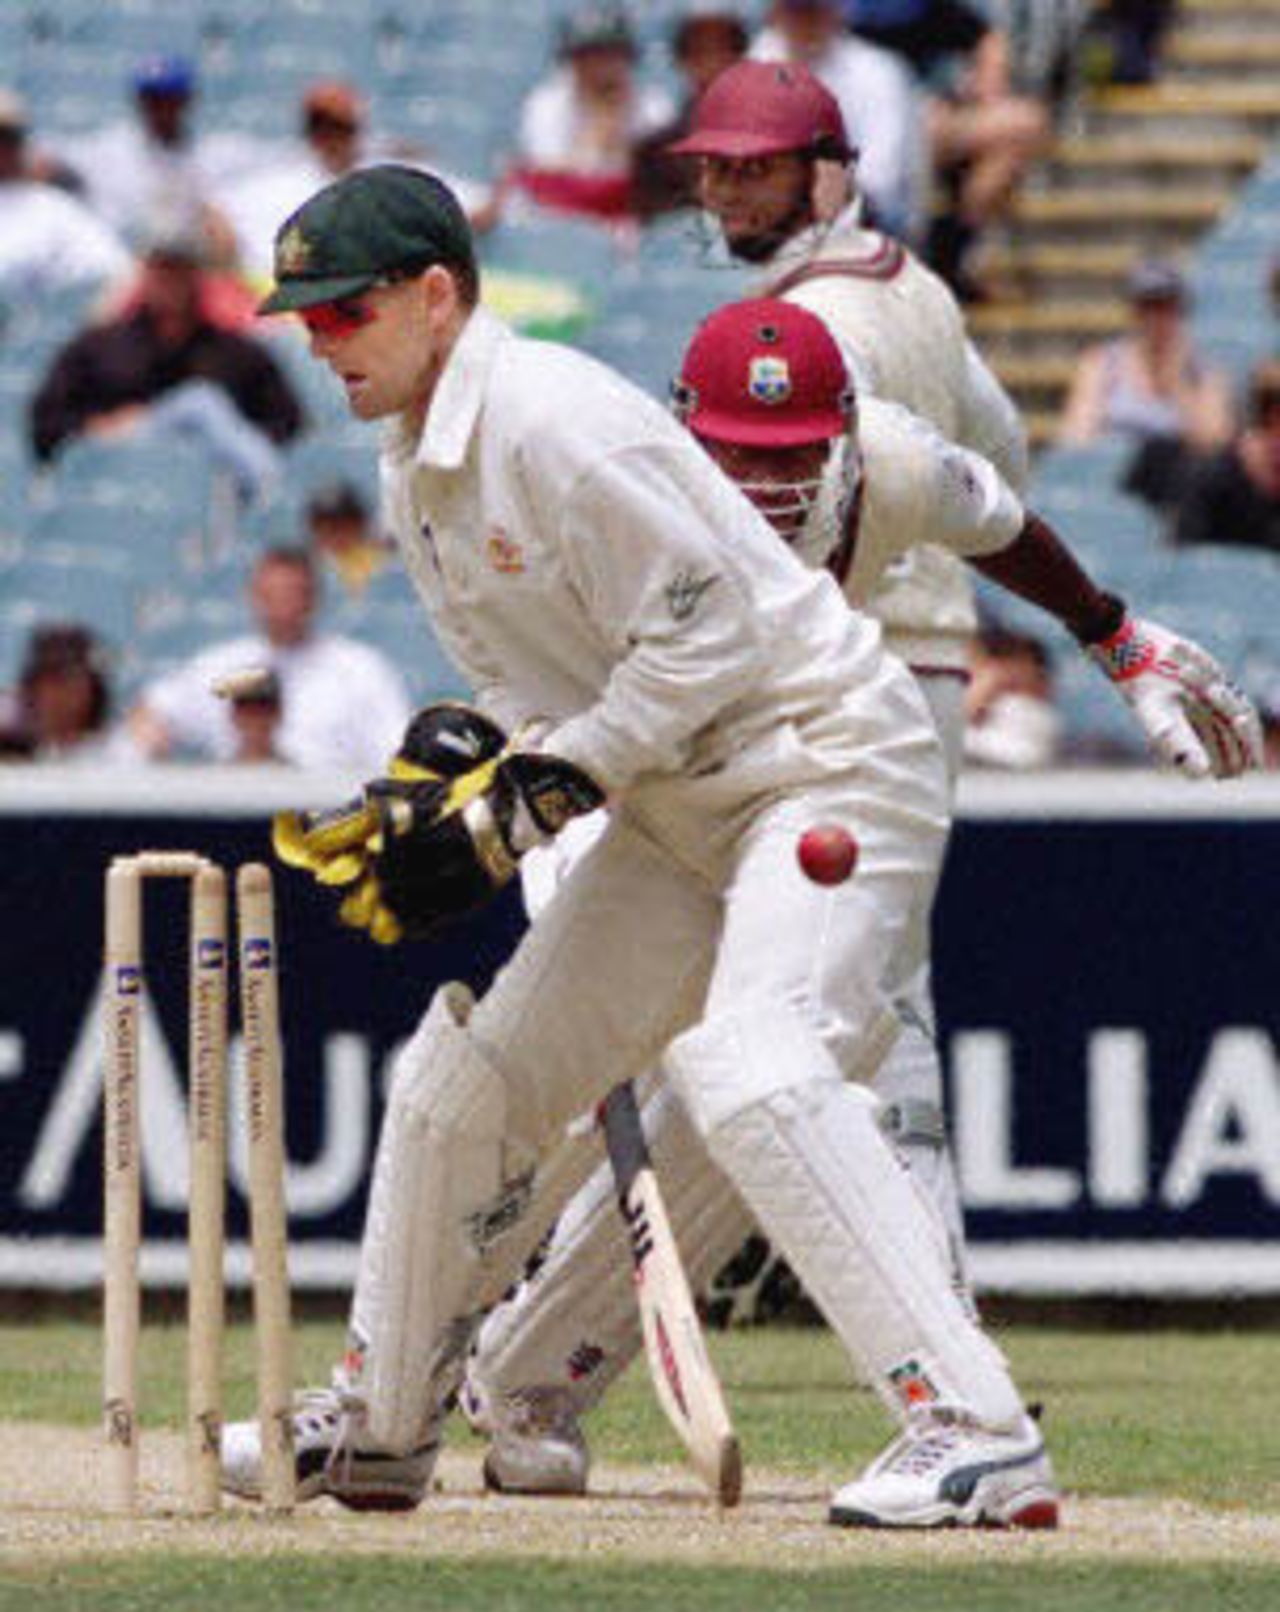 Australian wicketkeeper Adam Gilchrist looks on as a direct throw hits the wickets to run-out West Indian batsman Nixon McLean (C) as his teammate Marlon Samuels looks back to watch the outcome on the fourth day of the fourth Test match at the MCG in Melbourne, 29 December 2000. Once again the West Indies are on the verge of defeat being 78-8 at lunch, still requiring 384 runs for victory.